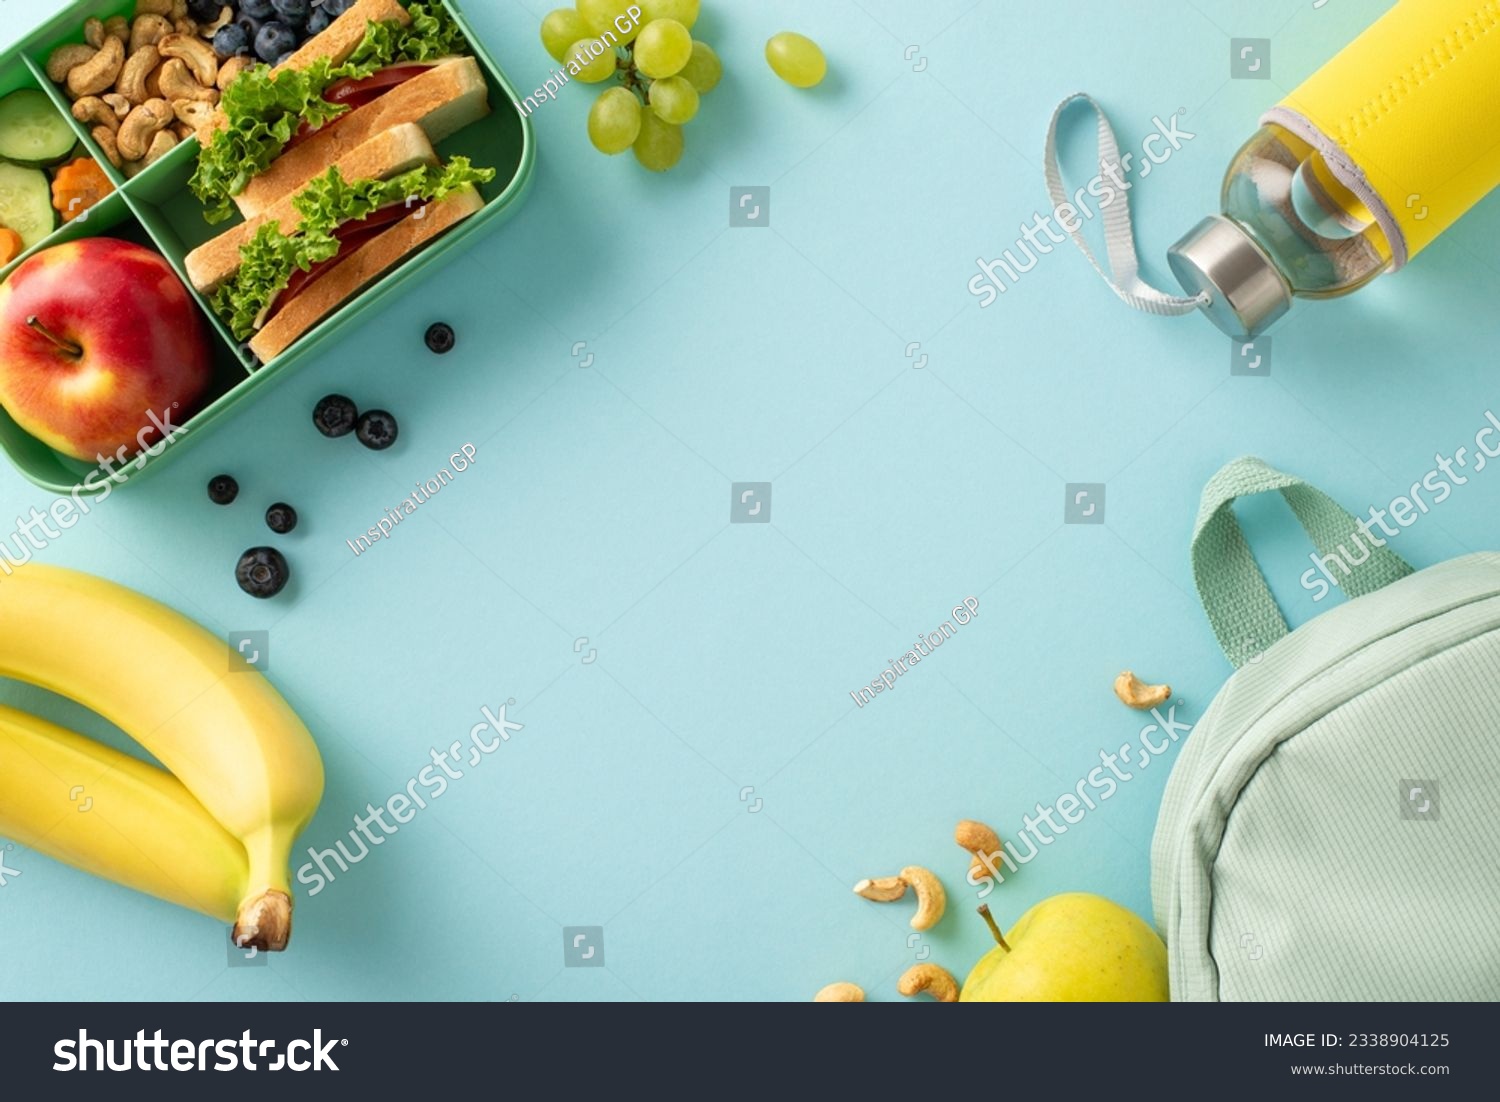 A nourishing school break scene from above, displaying a lunchbox with sandwiches accompanied by fruits, berries, water bottle and rucksack on blue isolated backdrop, perfect for text or advertising #2338904125